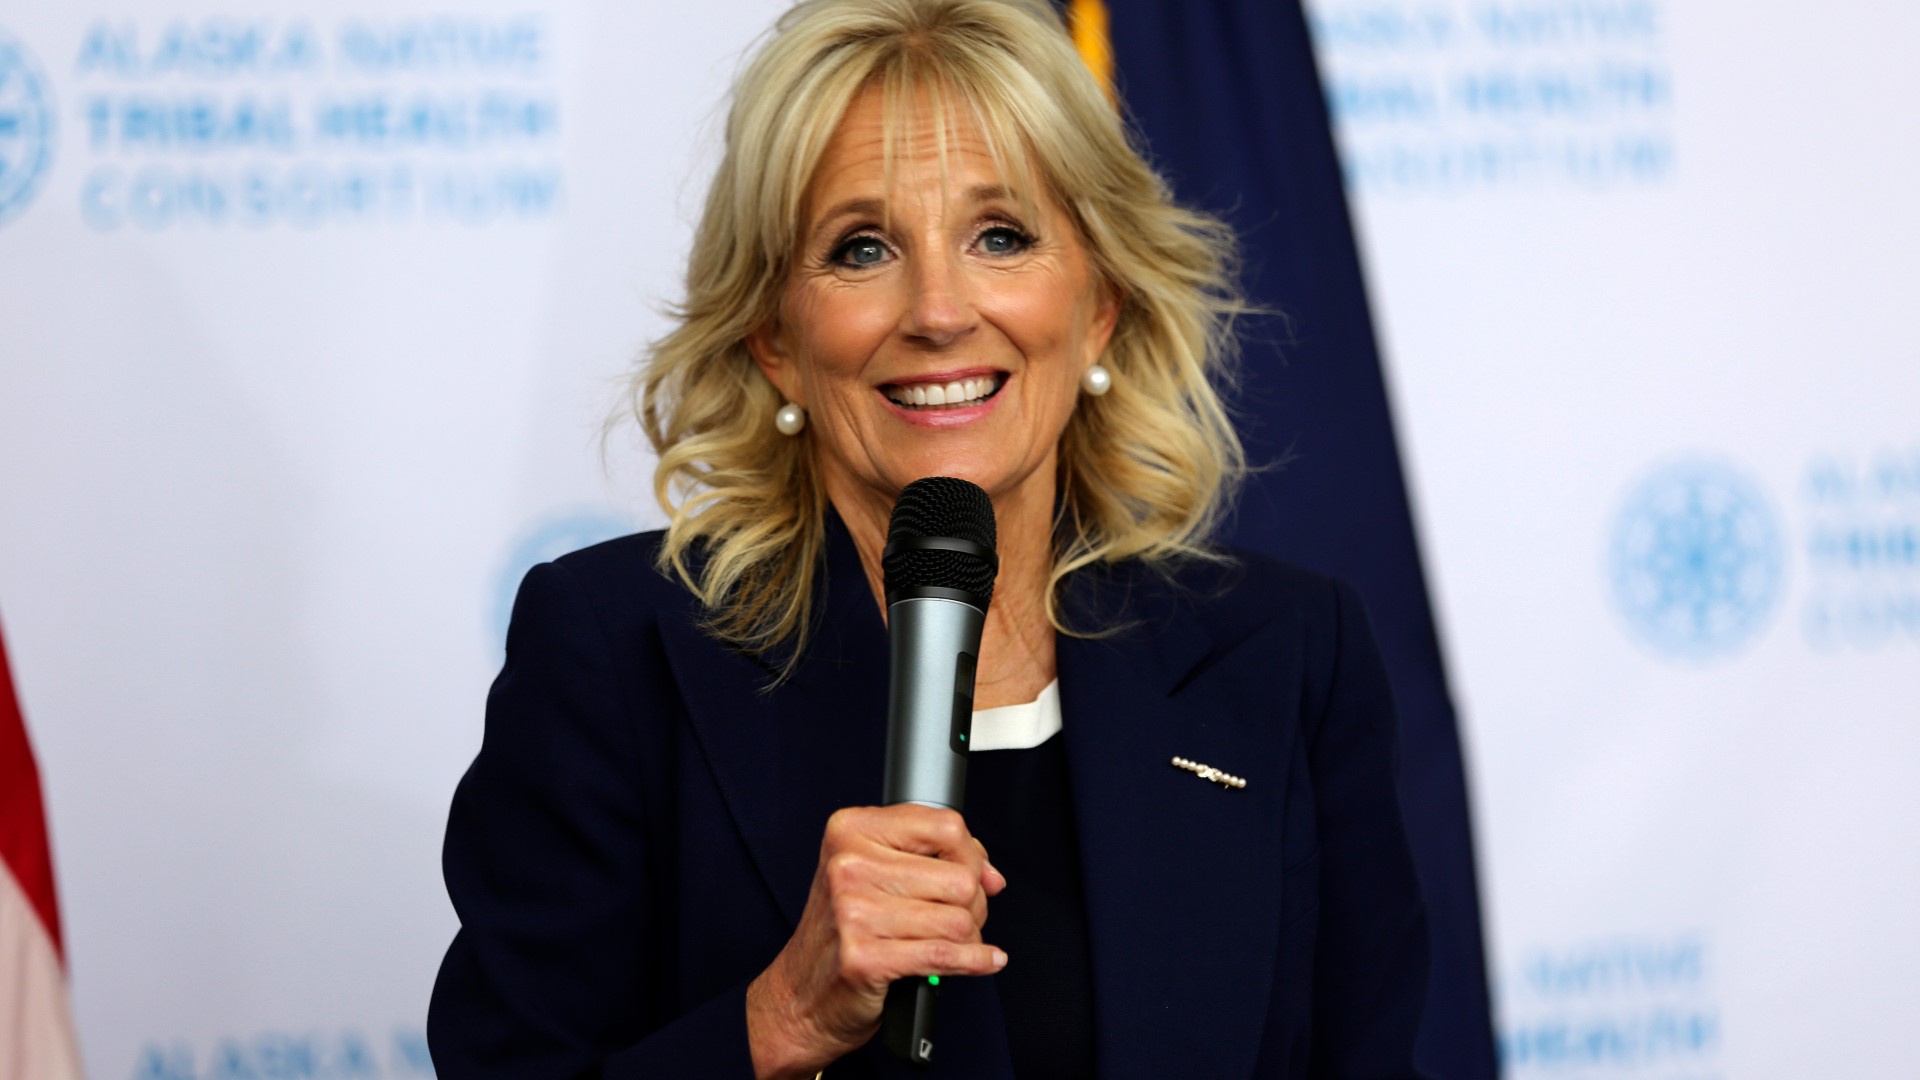 The White House said Jill Biden tested negative for COVID-19 Monday as part of regular testing, but then developed cold-like symptoms in the evening.